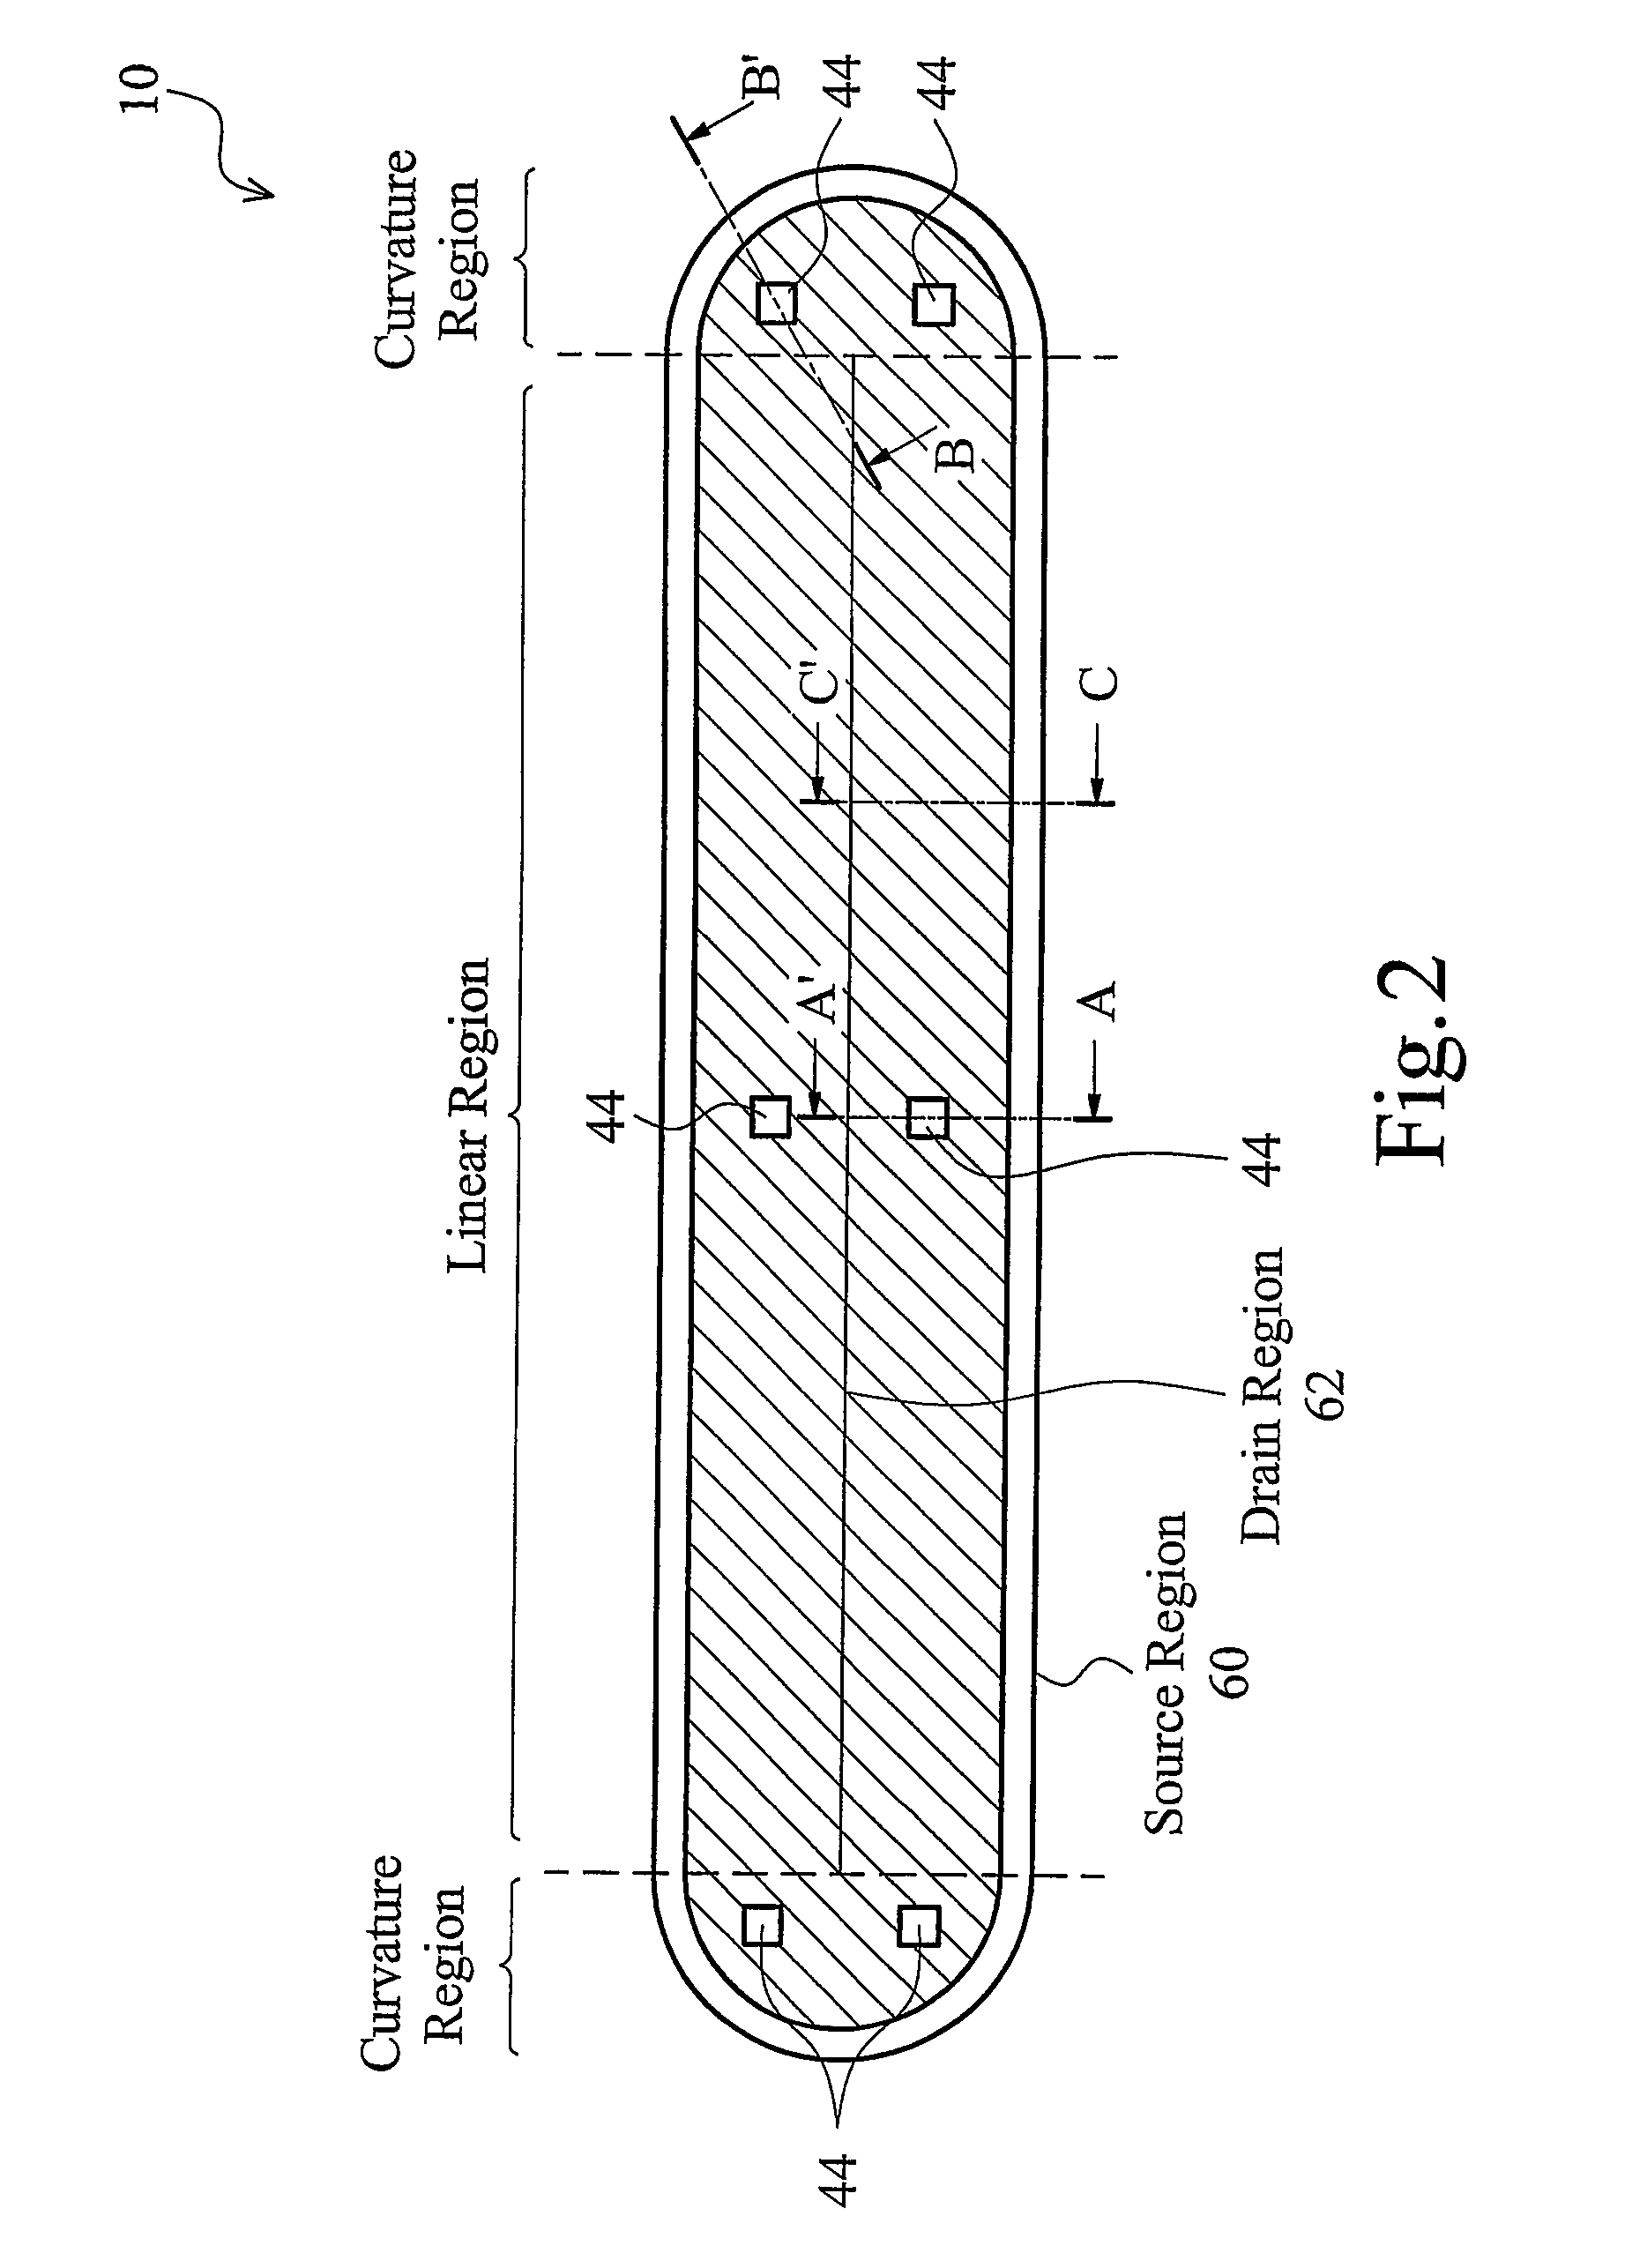 Stabilizing breakdown voltages by forming tunnels for ultra-high voltage devices